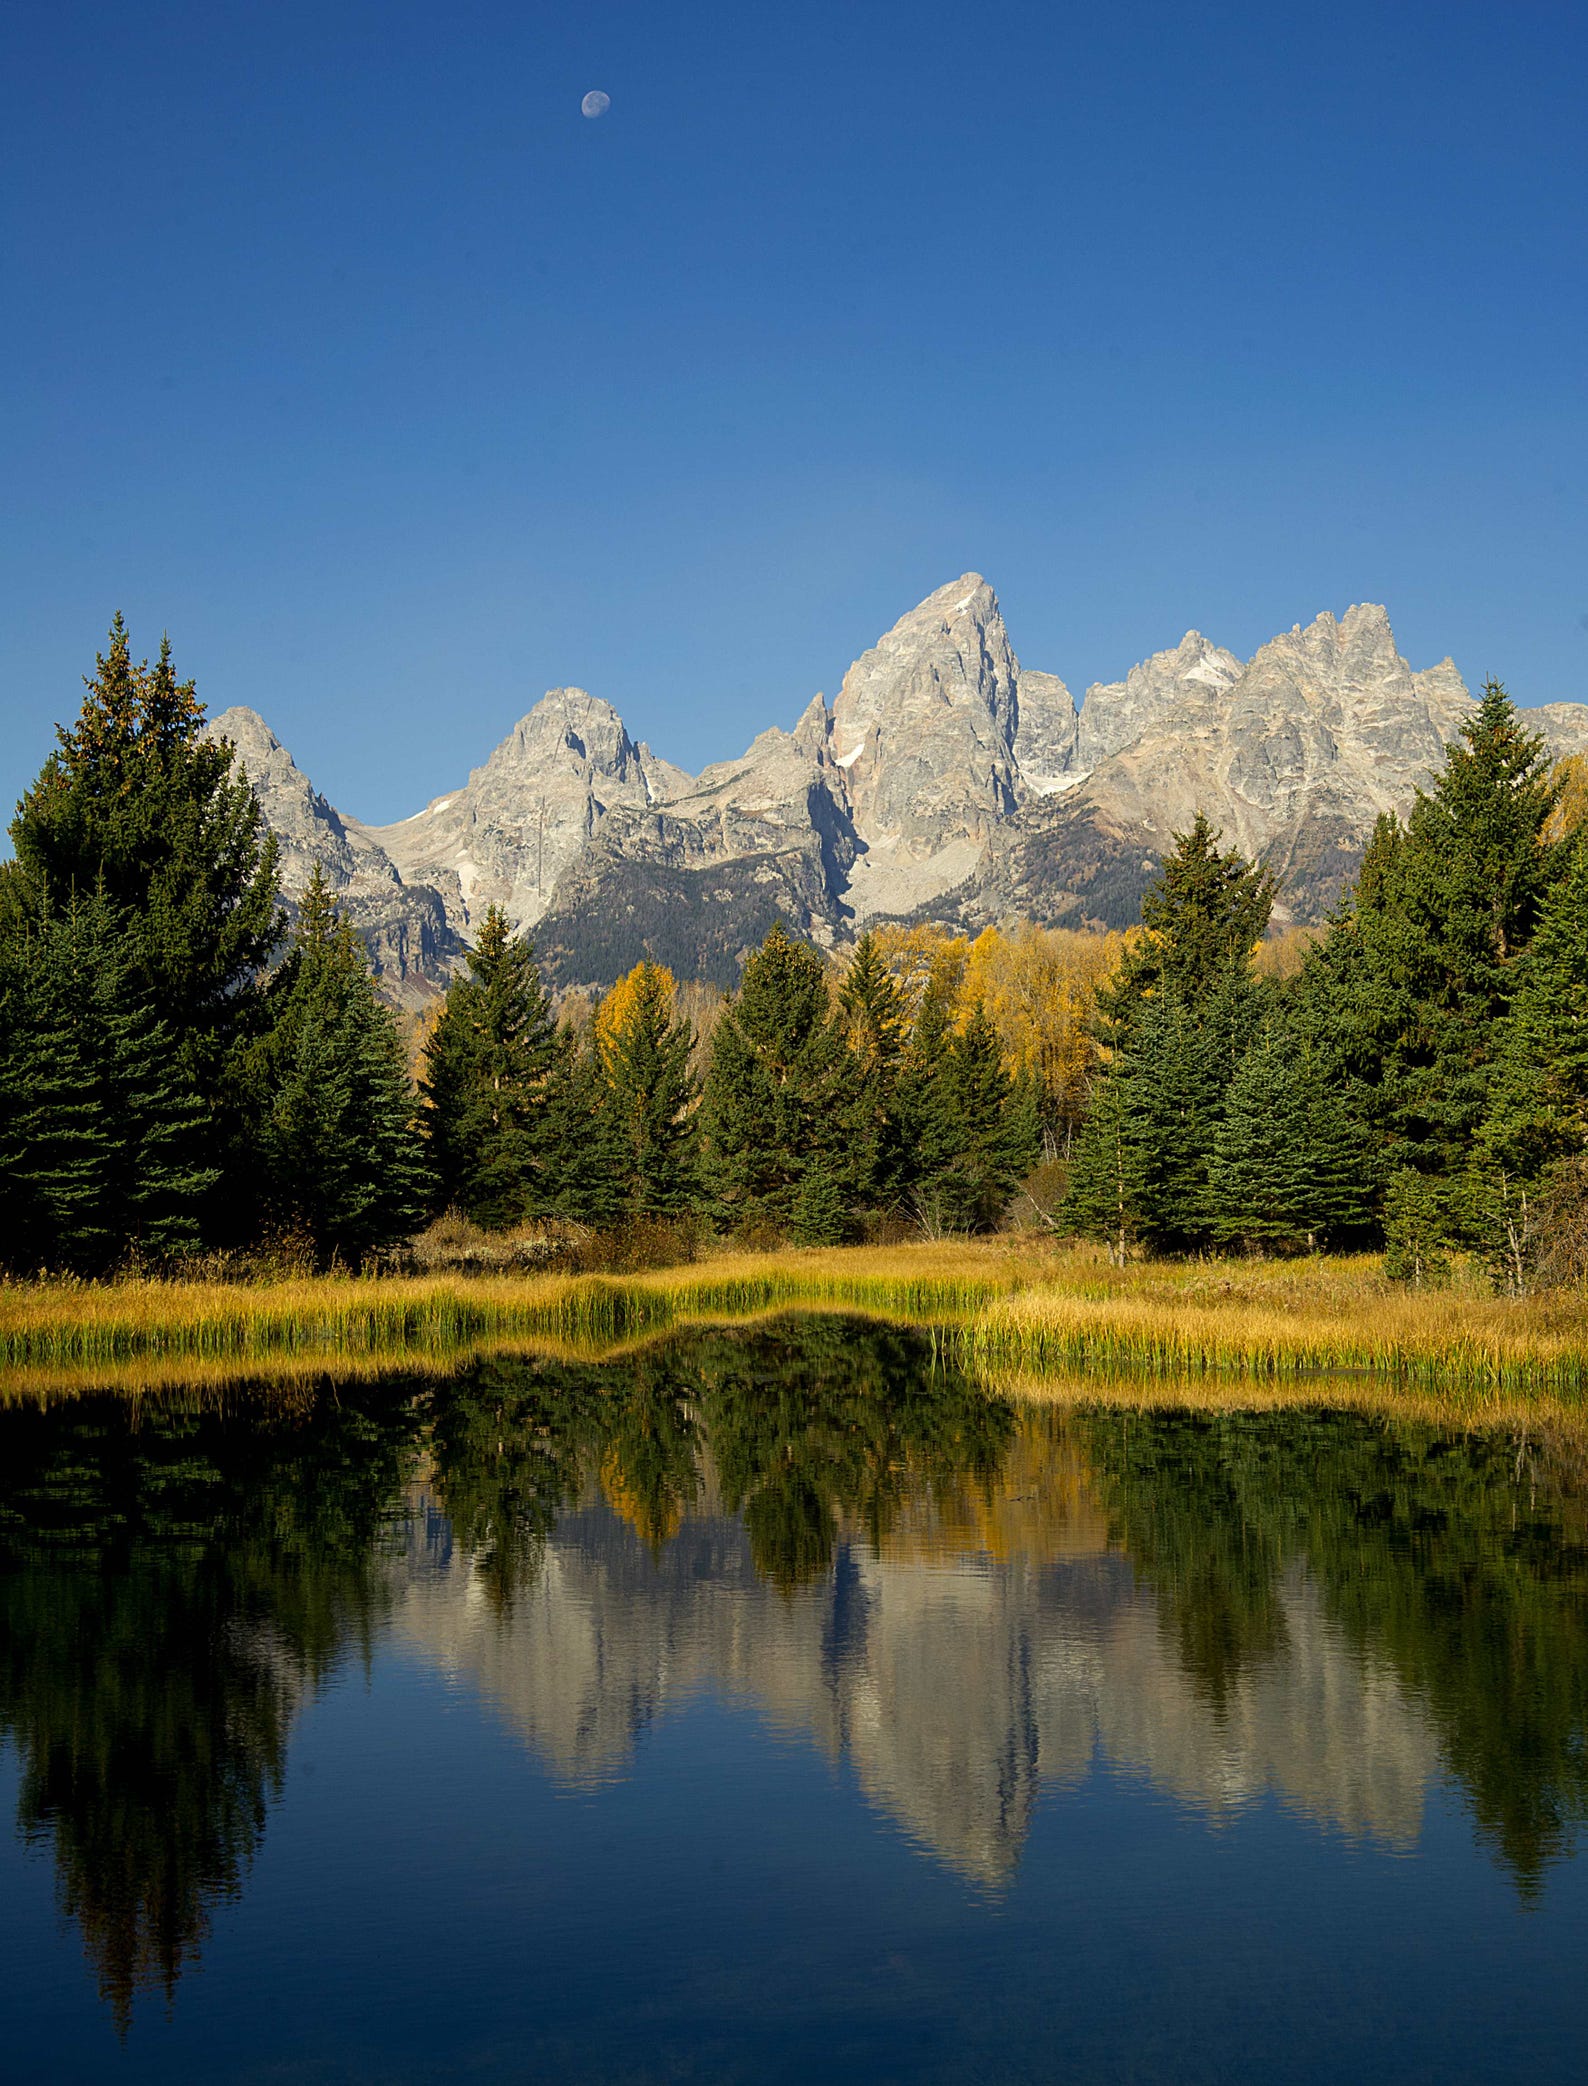 Wyoming: Photo tour of National Parks, water